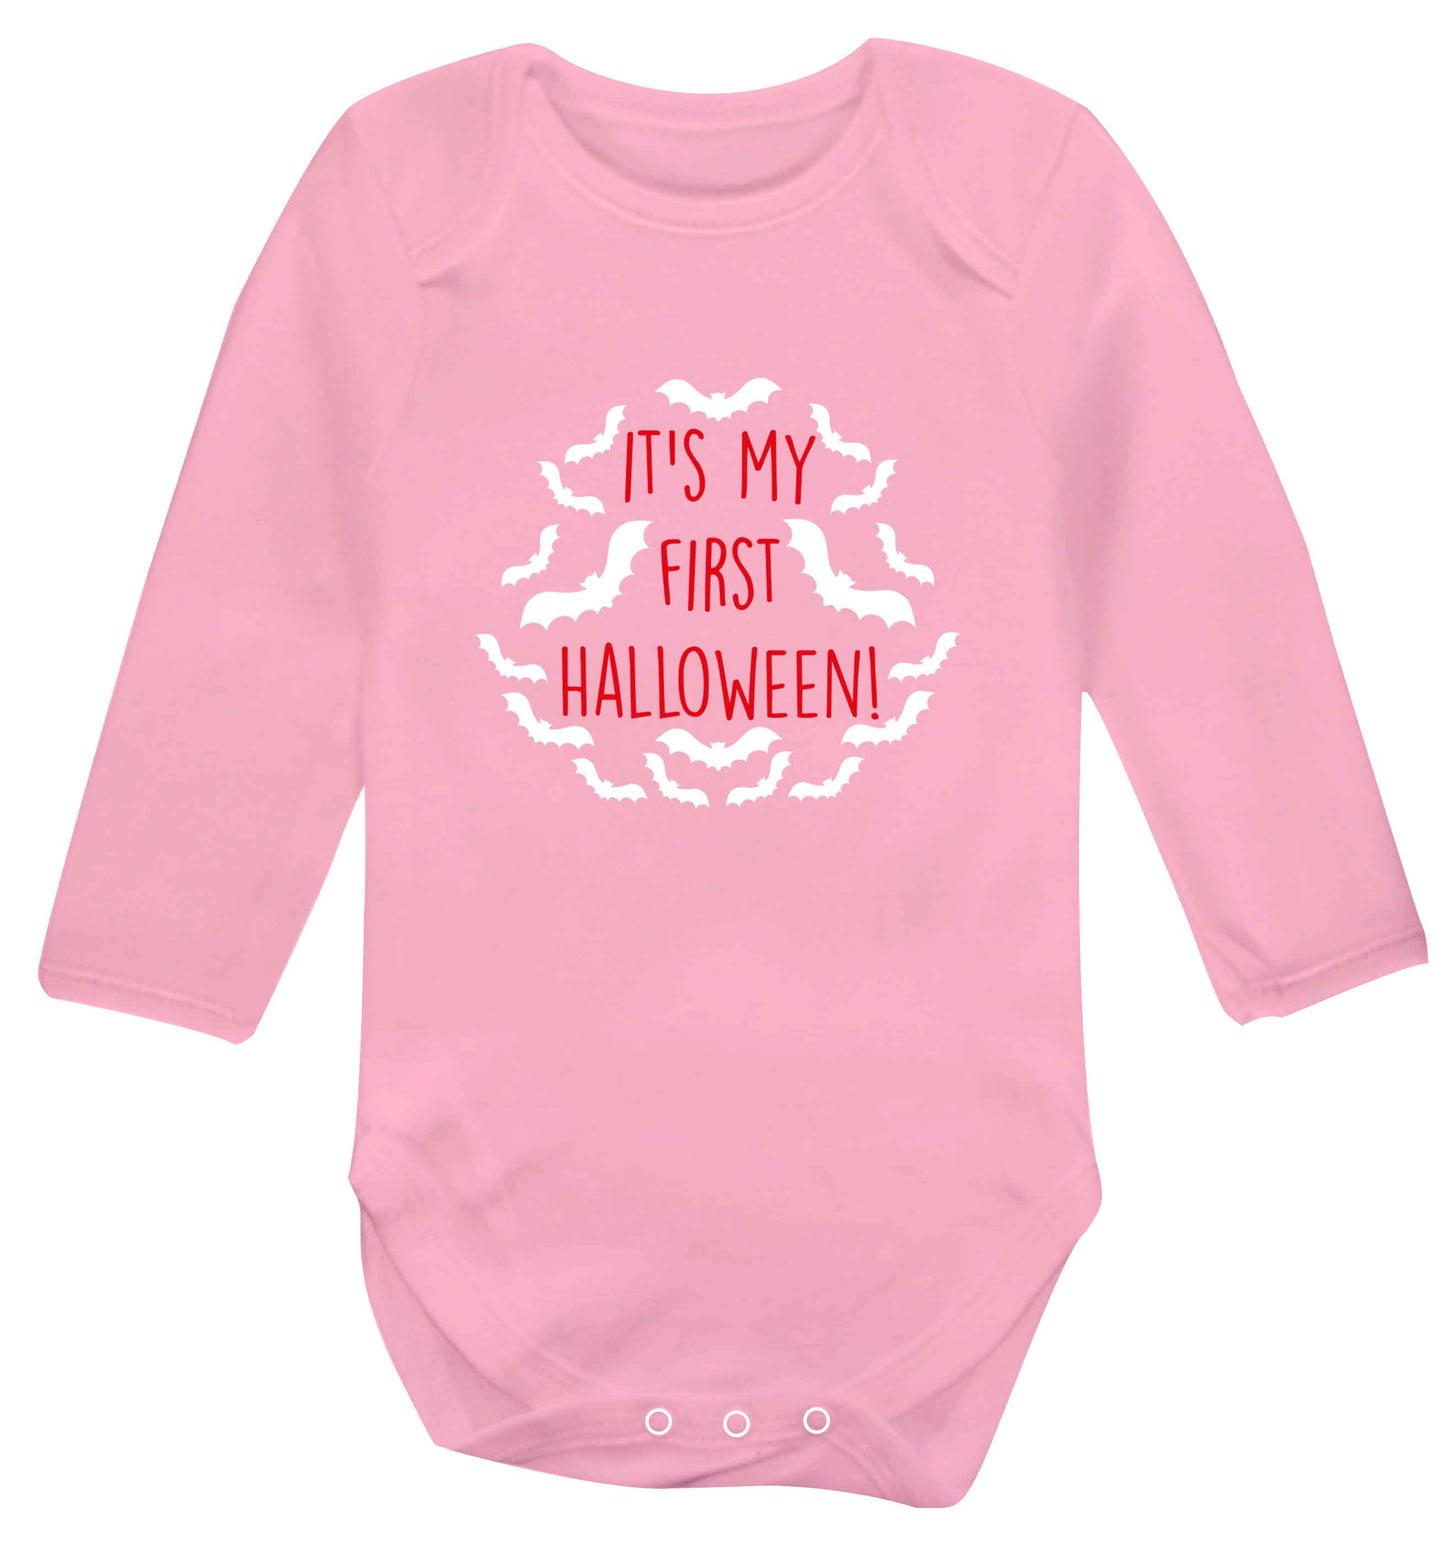 It's my first halloween - bat border baby vest long sleeved pale pink 6-12 months